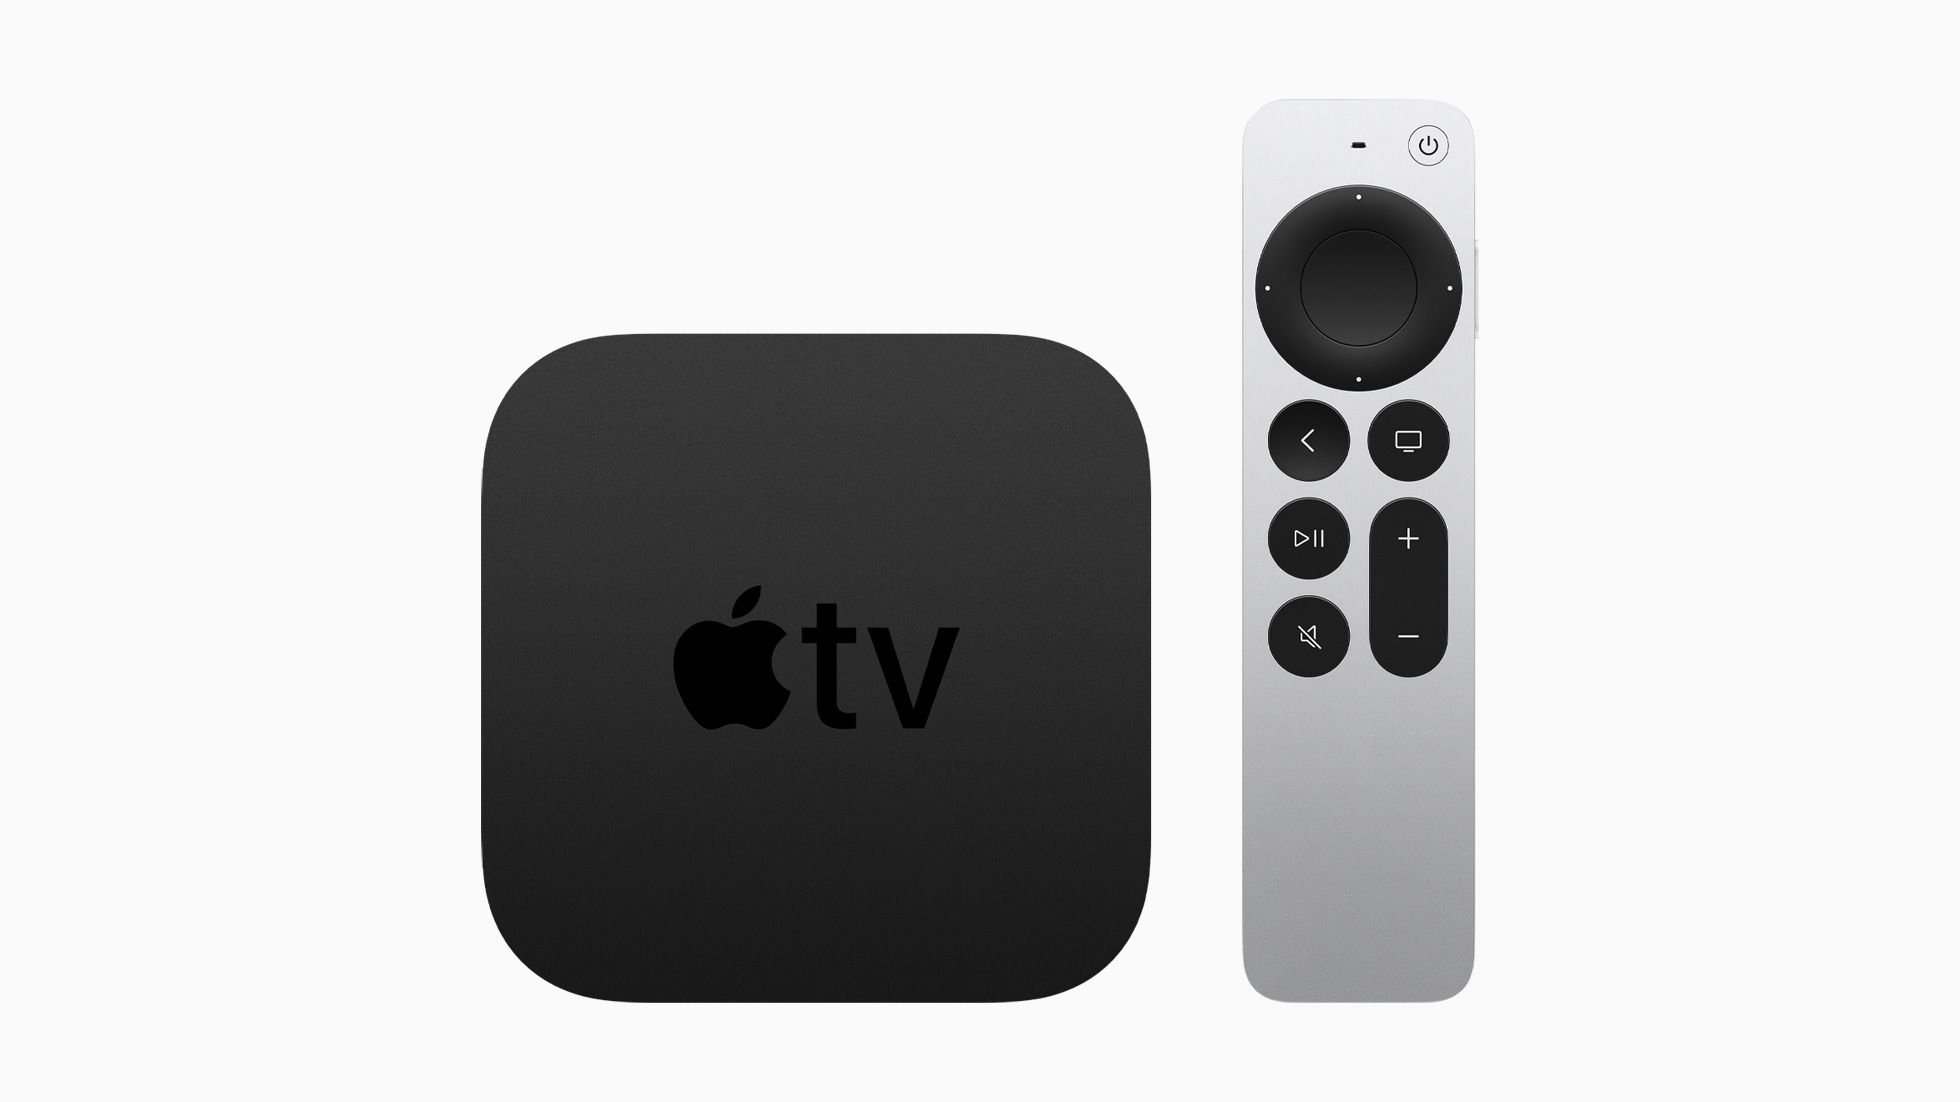 The new Apple TV 4K and updated remote side-by-side